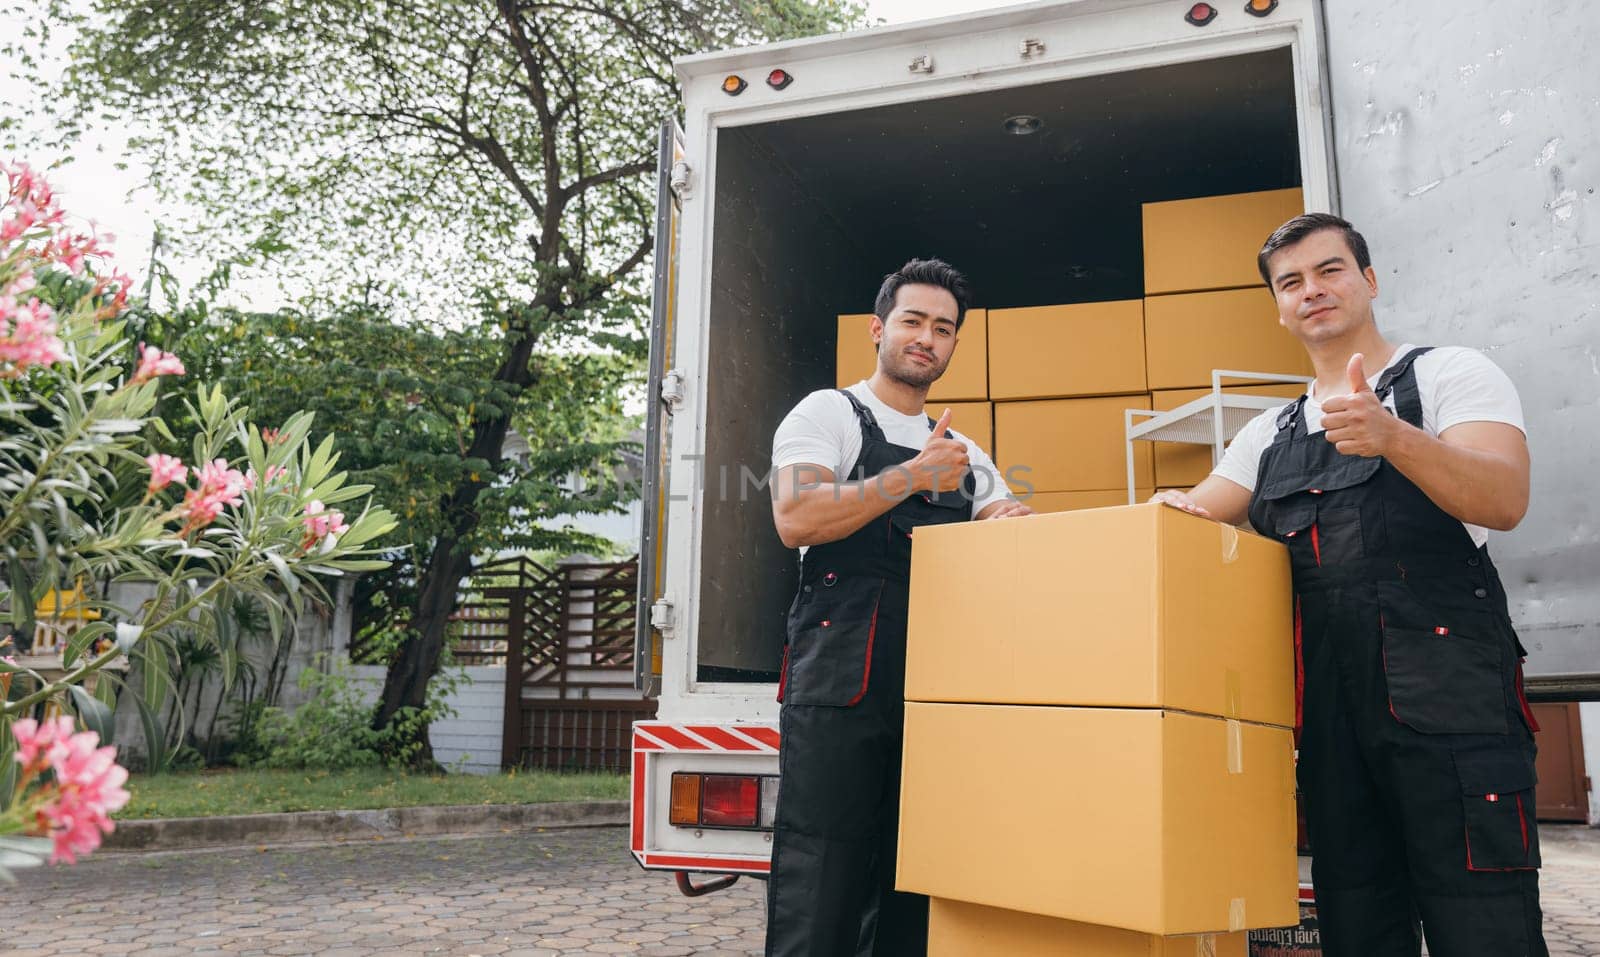 Efficient workers in uniform unload boxes from the moving truck ensuring a smooth delivery for customer relocation. The team dedication guarantees happiness. Moving Day by Sorapop